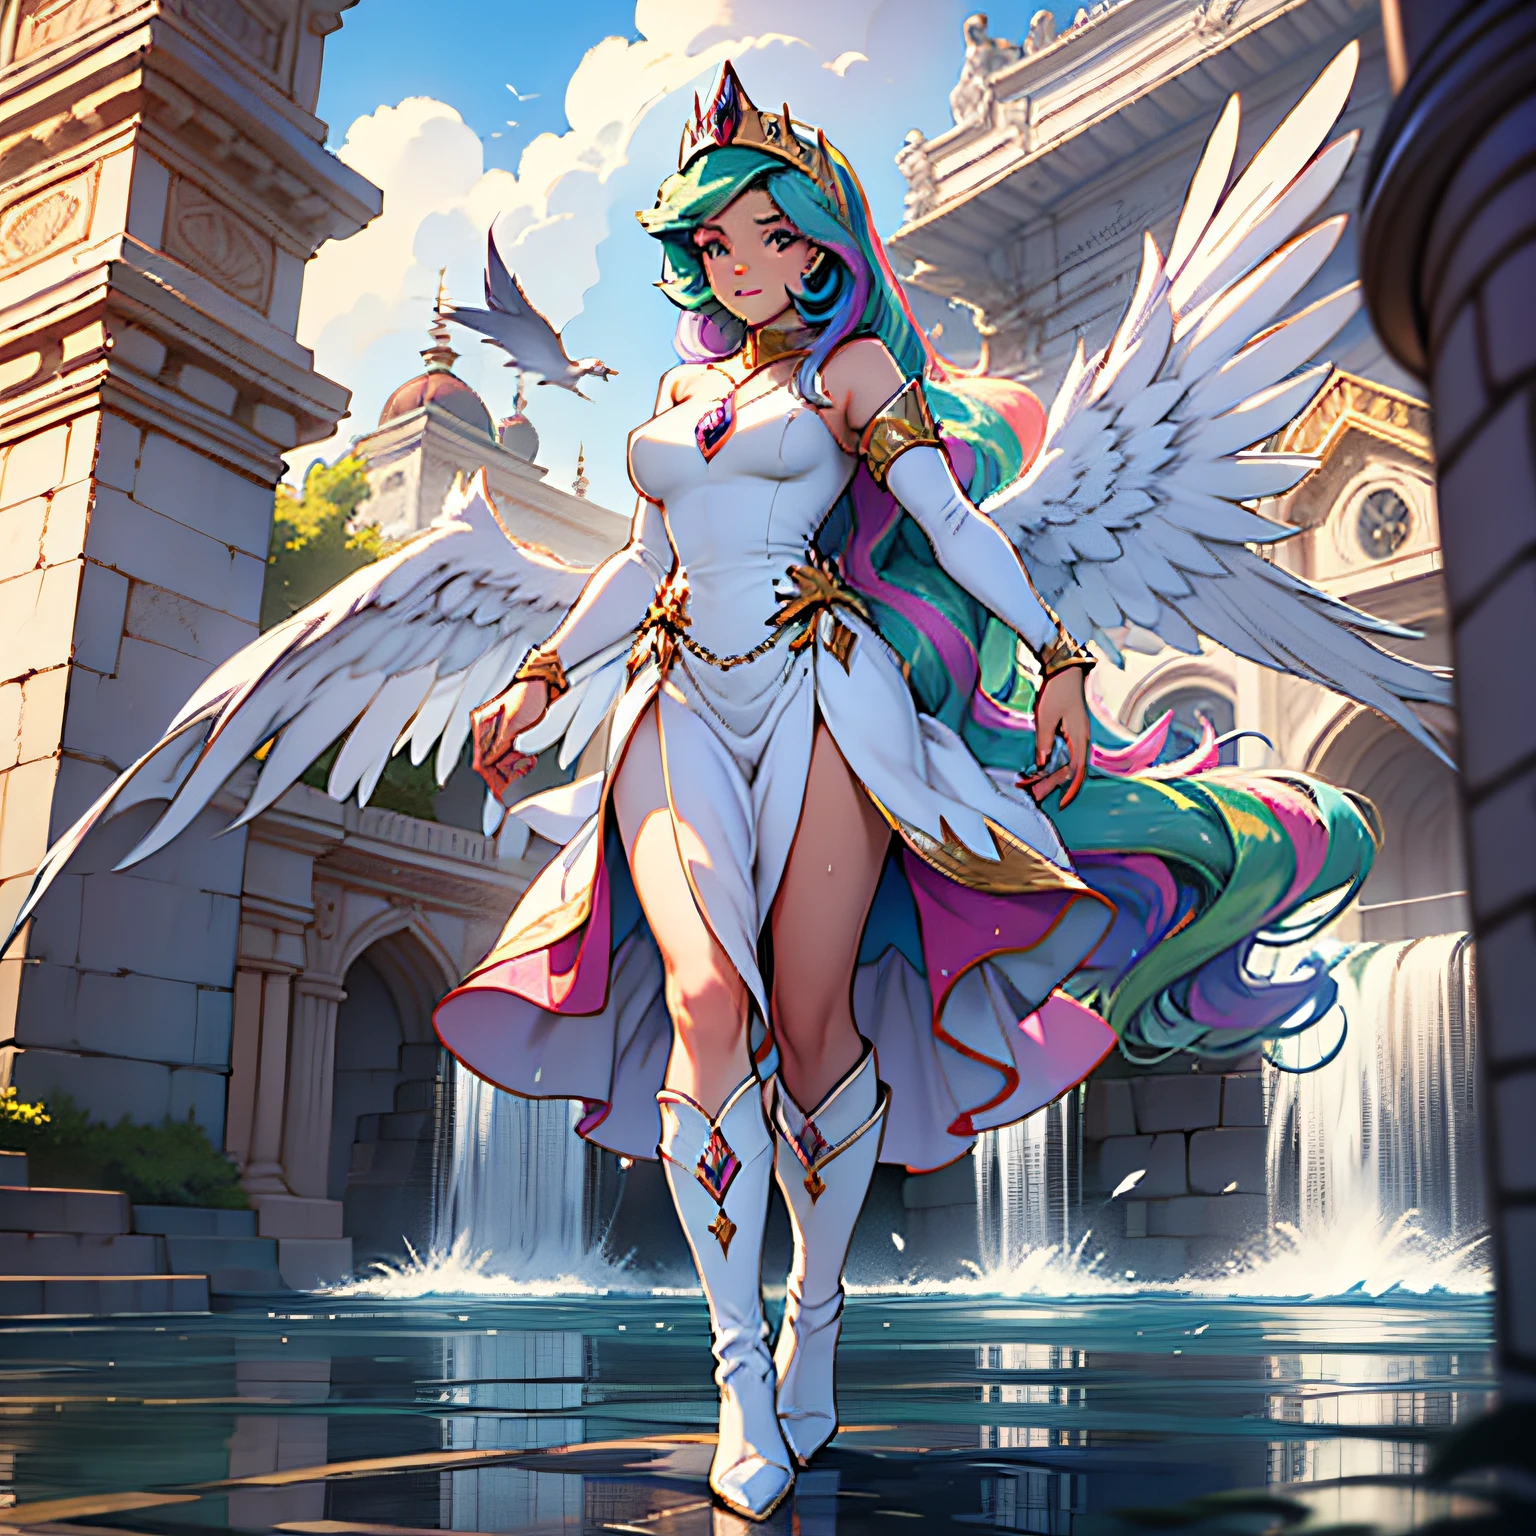 Celestial Man, Princess Celestia from my little pony, Princess Celestia in the form of a girl, Big breasts, crisp breasts, crisp breasts, Elastic breasts, You can see the whole body, shin, Heels, Feet, Five fingers, Detailed hands, There are daylight wings on the back, White feathers, Thin lace white dress, The clothes are wet, Translucent, Stand against the background of the palace, standing straight, White knee-length boots, Palace in the mountains,  The waterfall of the palace, dawn, White feathers flying, A palace in the distance